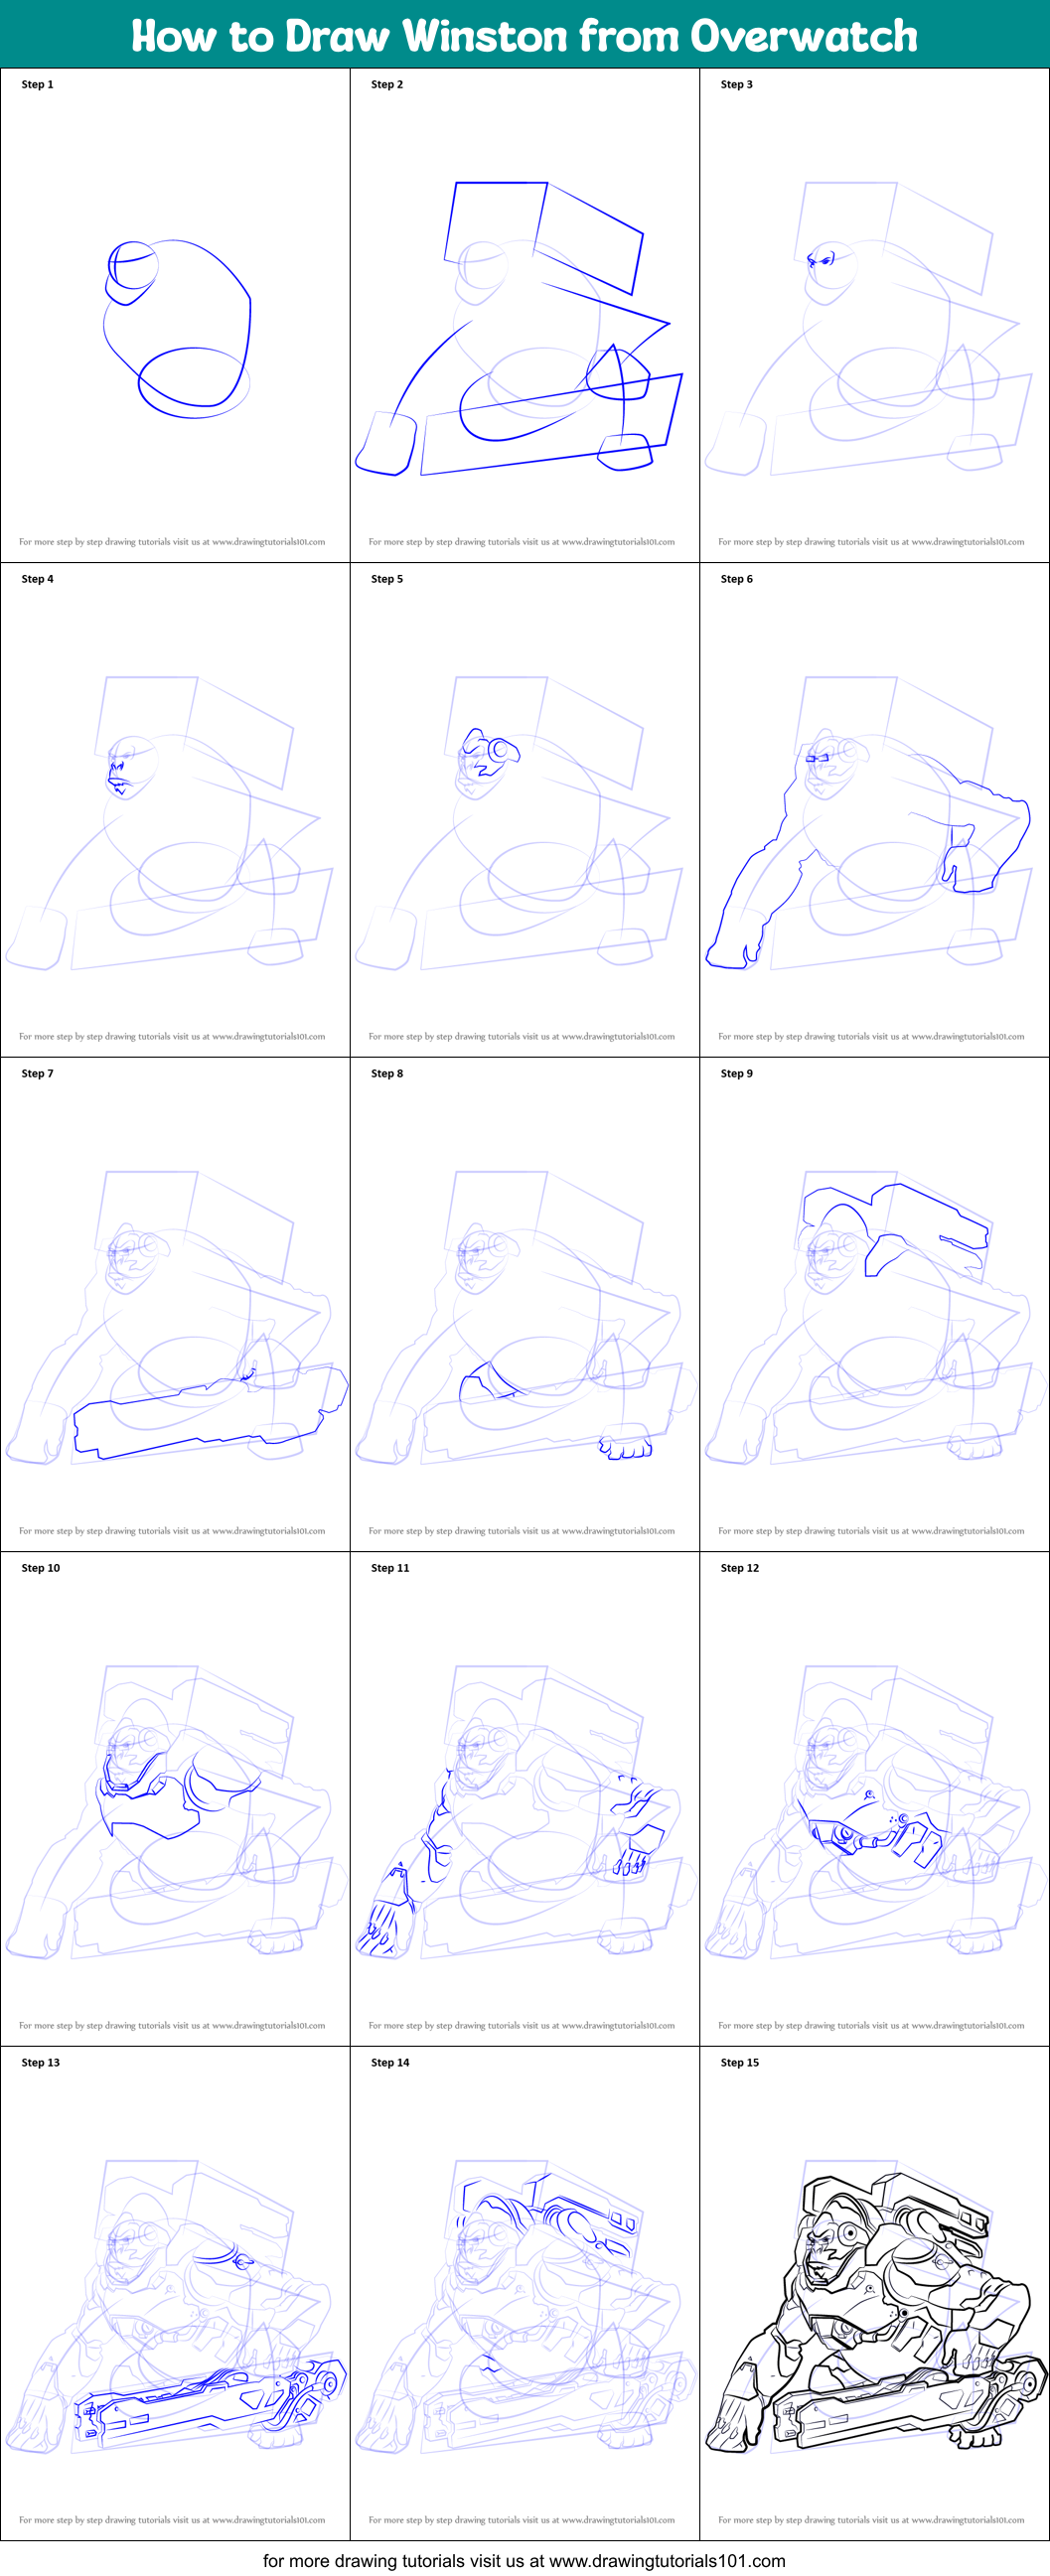 How to Draw Winston from Overwatch (Overwatch) Step by Step